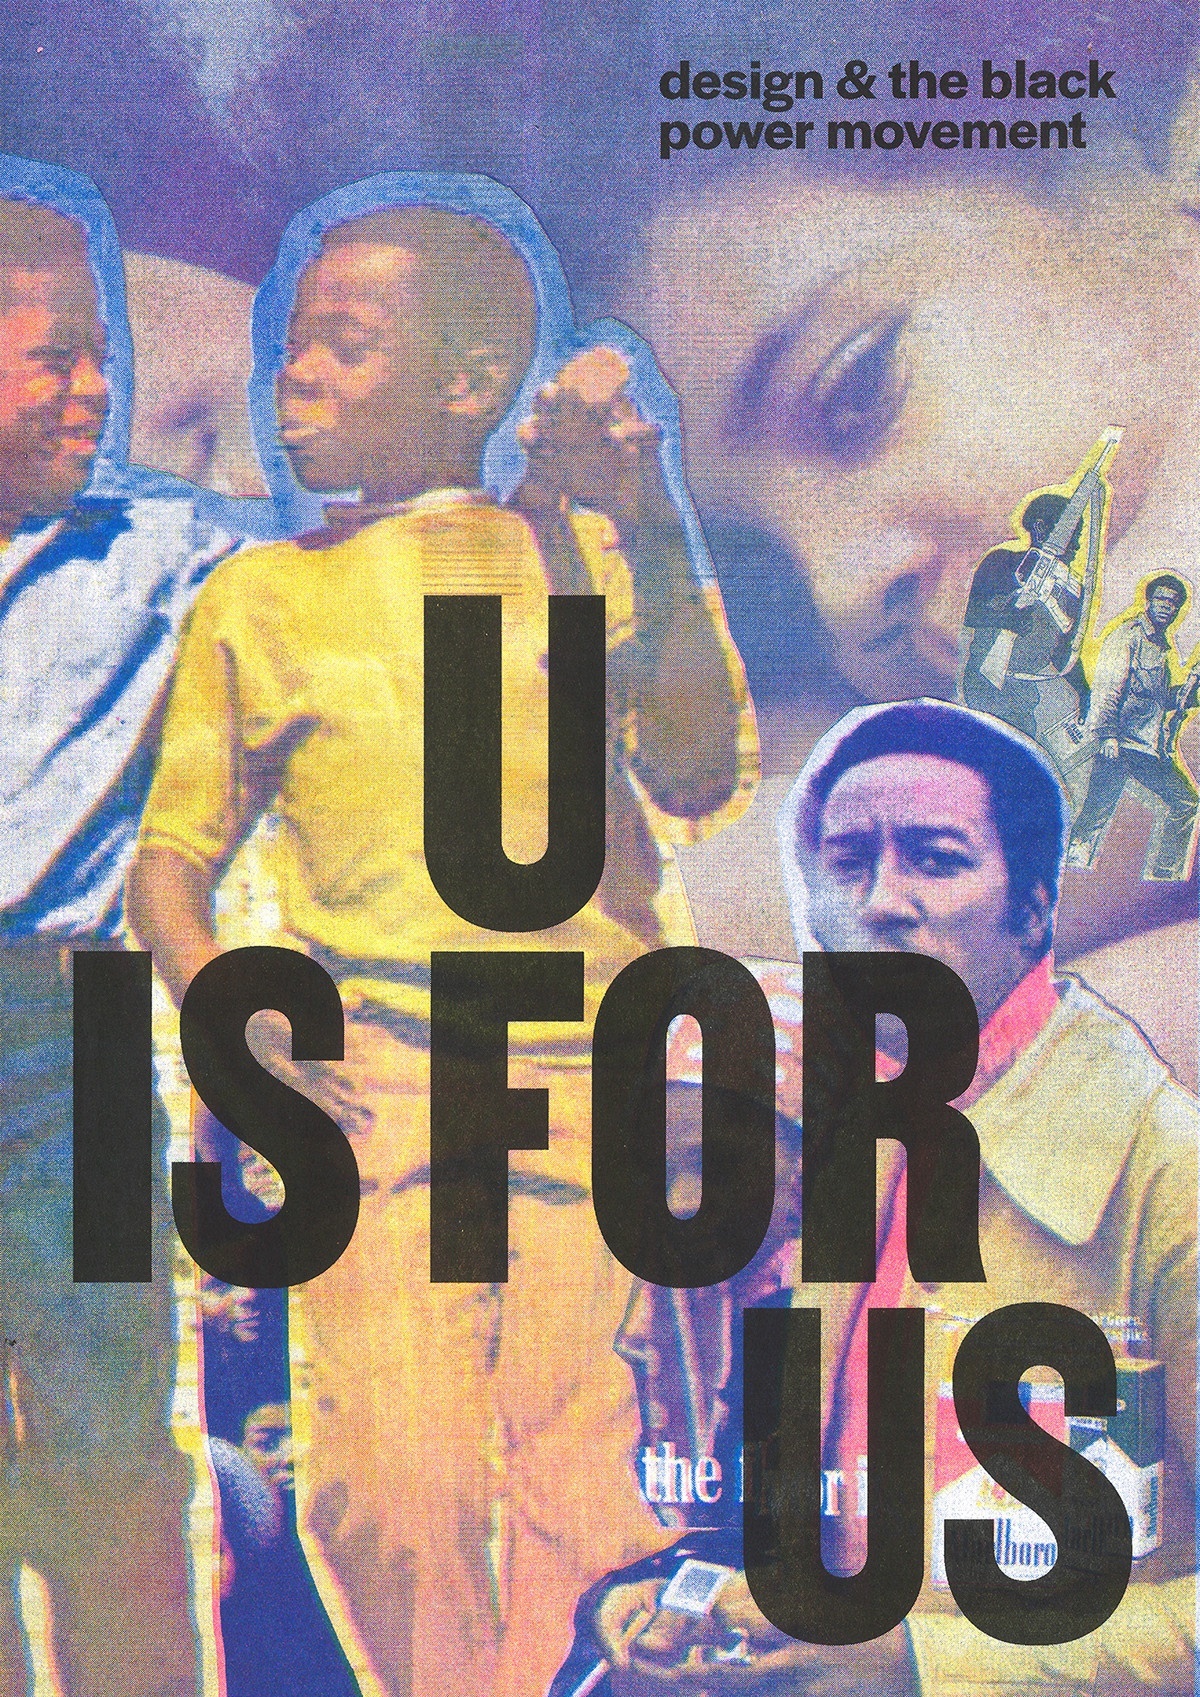 Media collage of figures expressing different emotions with "design & the black power movement" in the top right and "U IS FOR US" displayed over most the image.